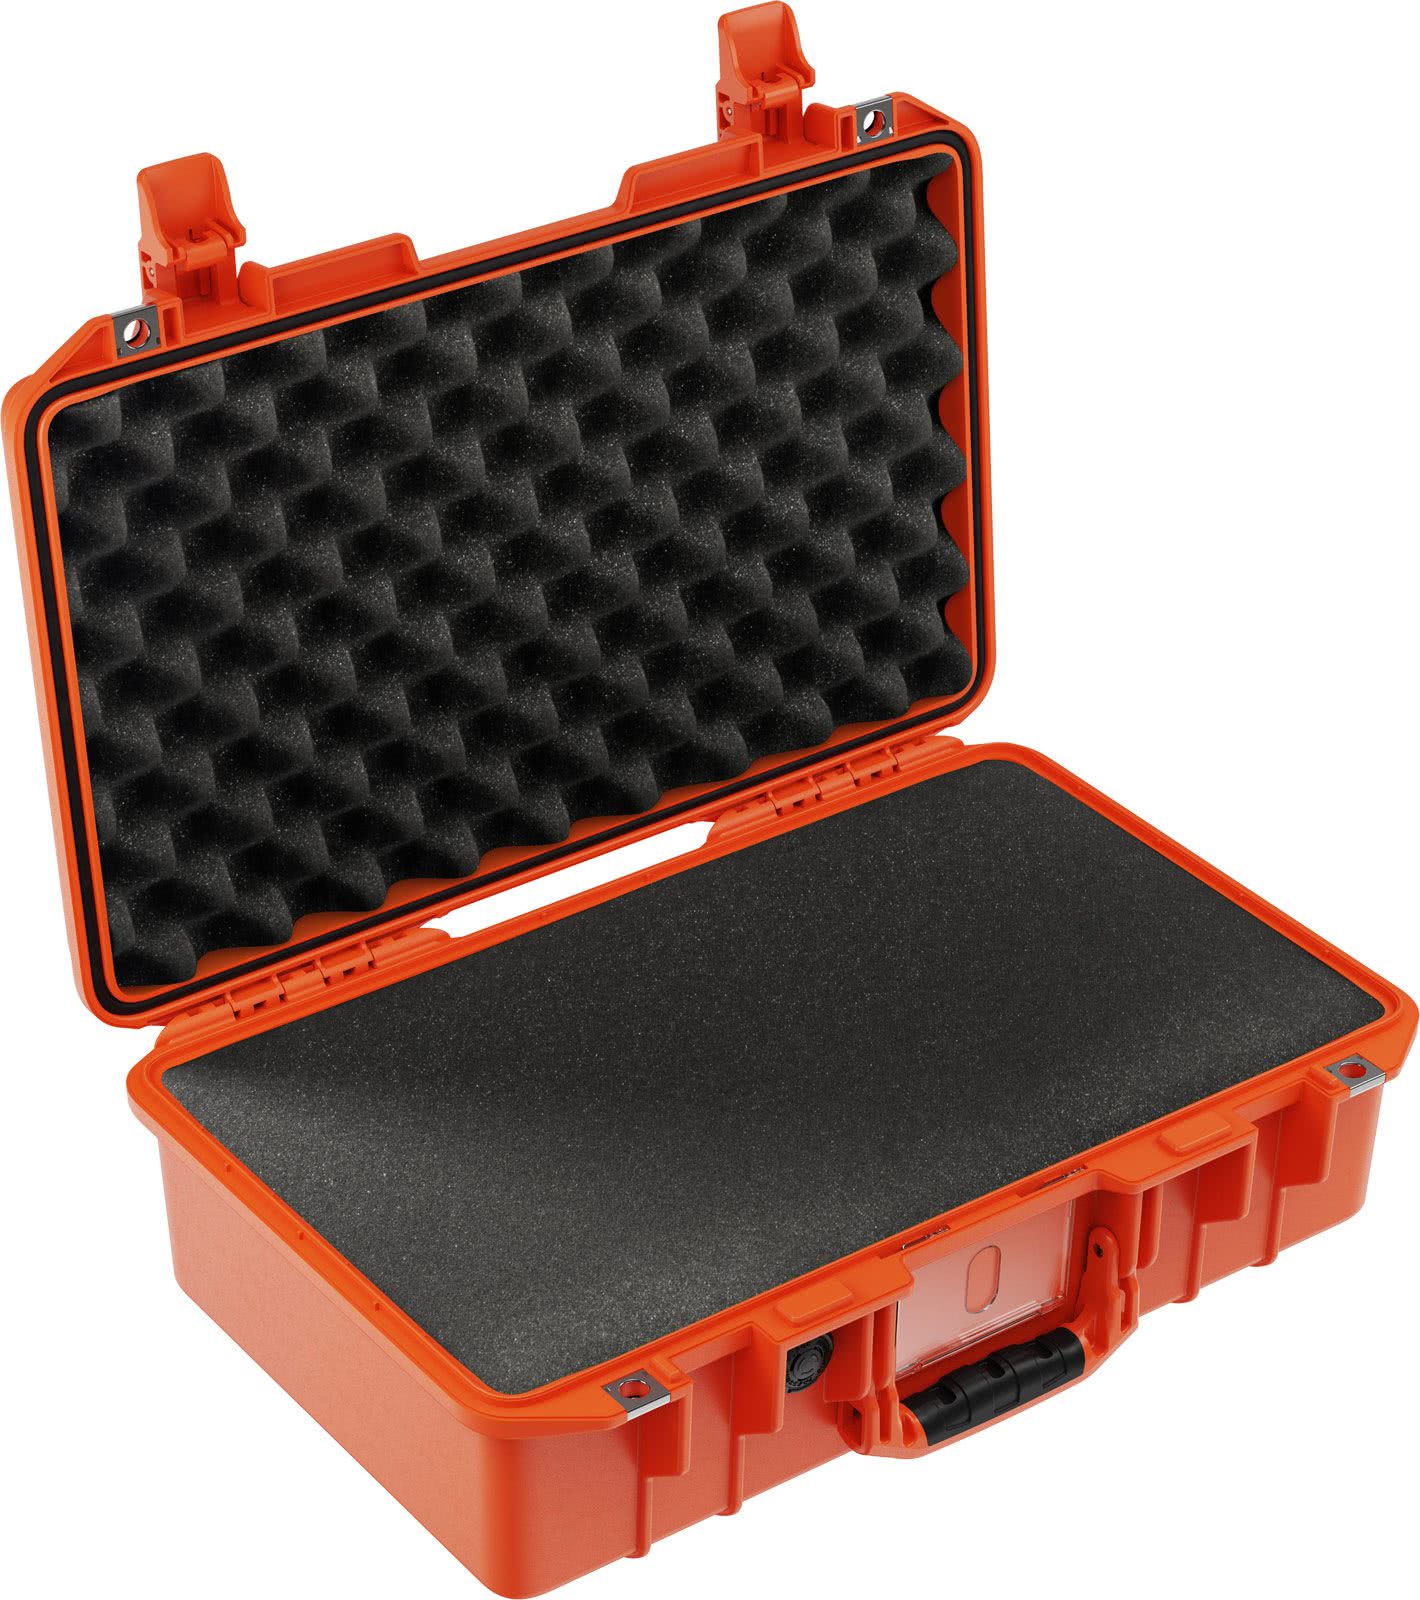 Pelican Products 1485 Air Case - Bags & Packs